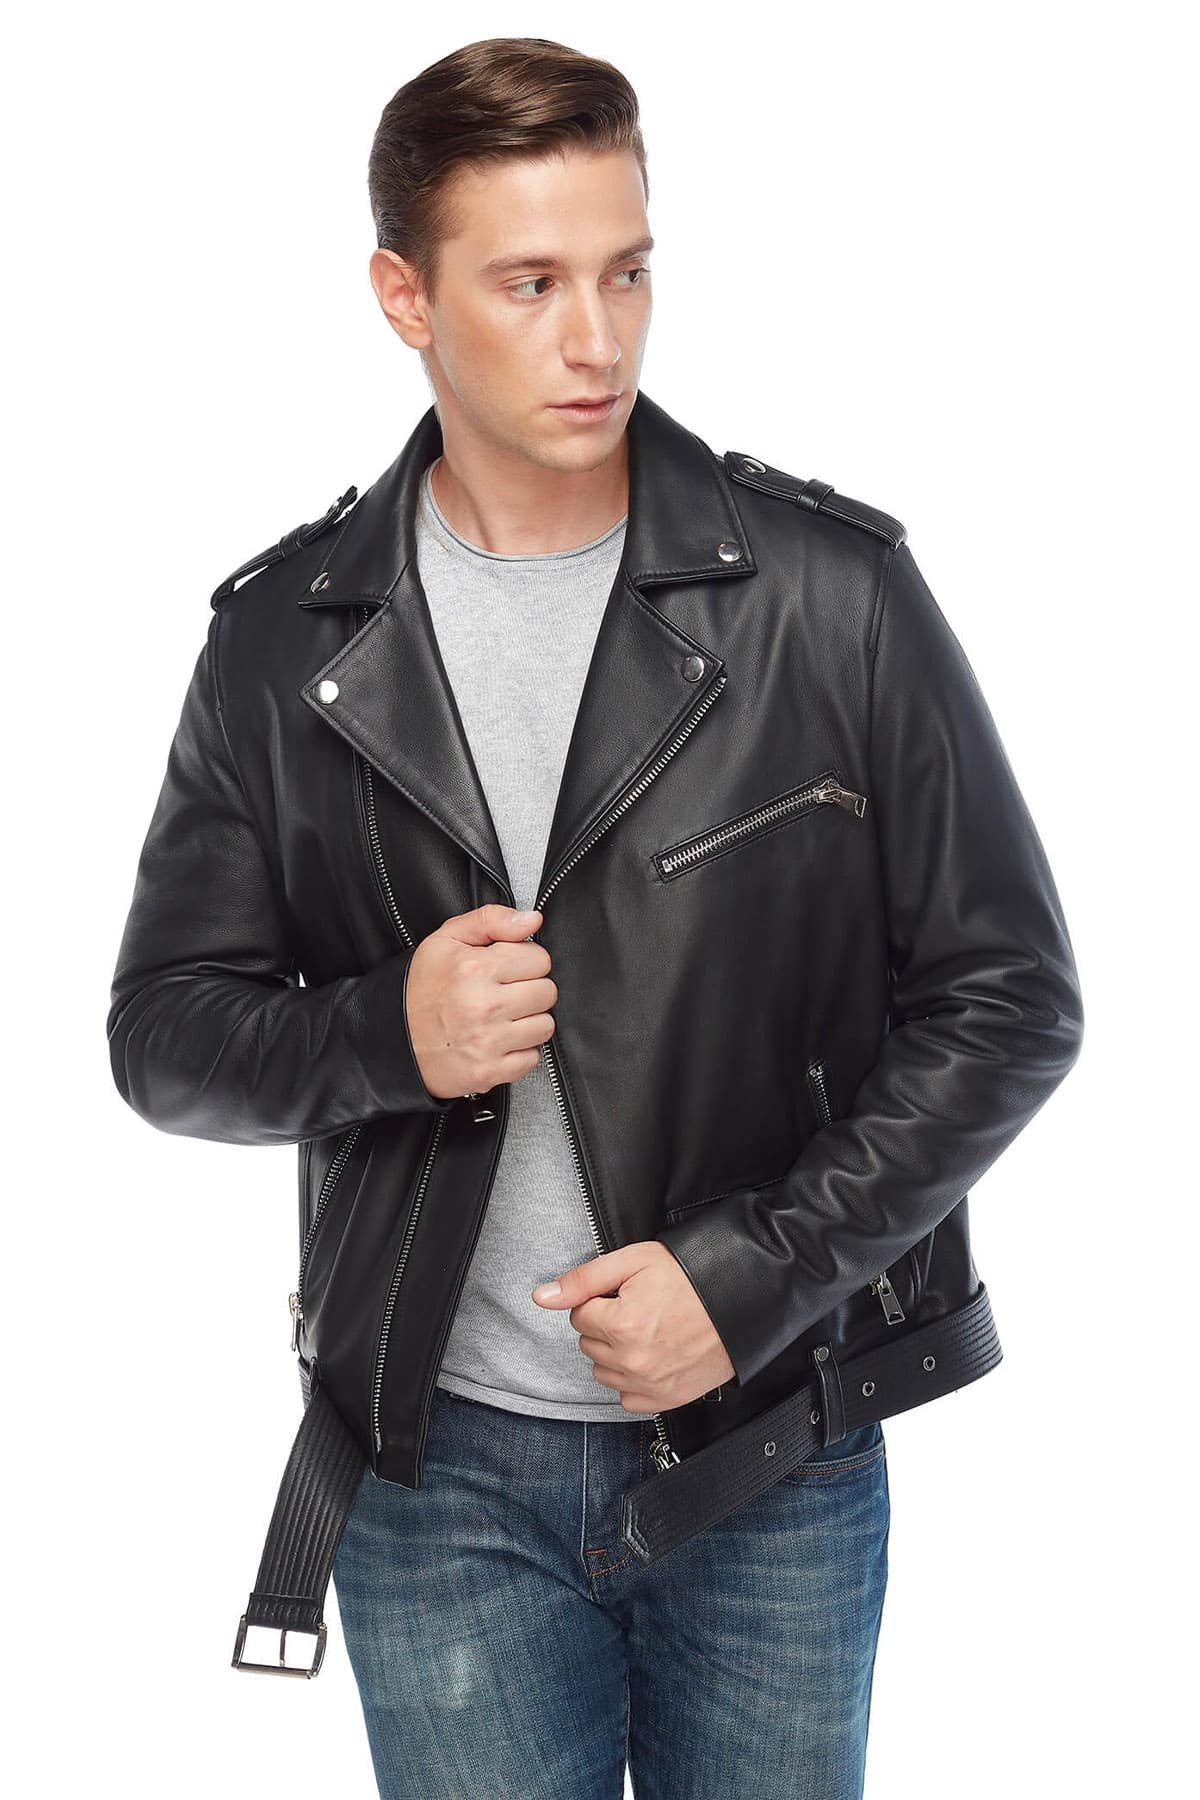 Buy TEAKWOOD LEATHERS Genuine Leather Brown solid Casual Sports Jacket for  Men | Casual Leather Men Biker Jacket (2x_l) at Amazon.in